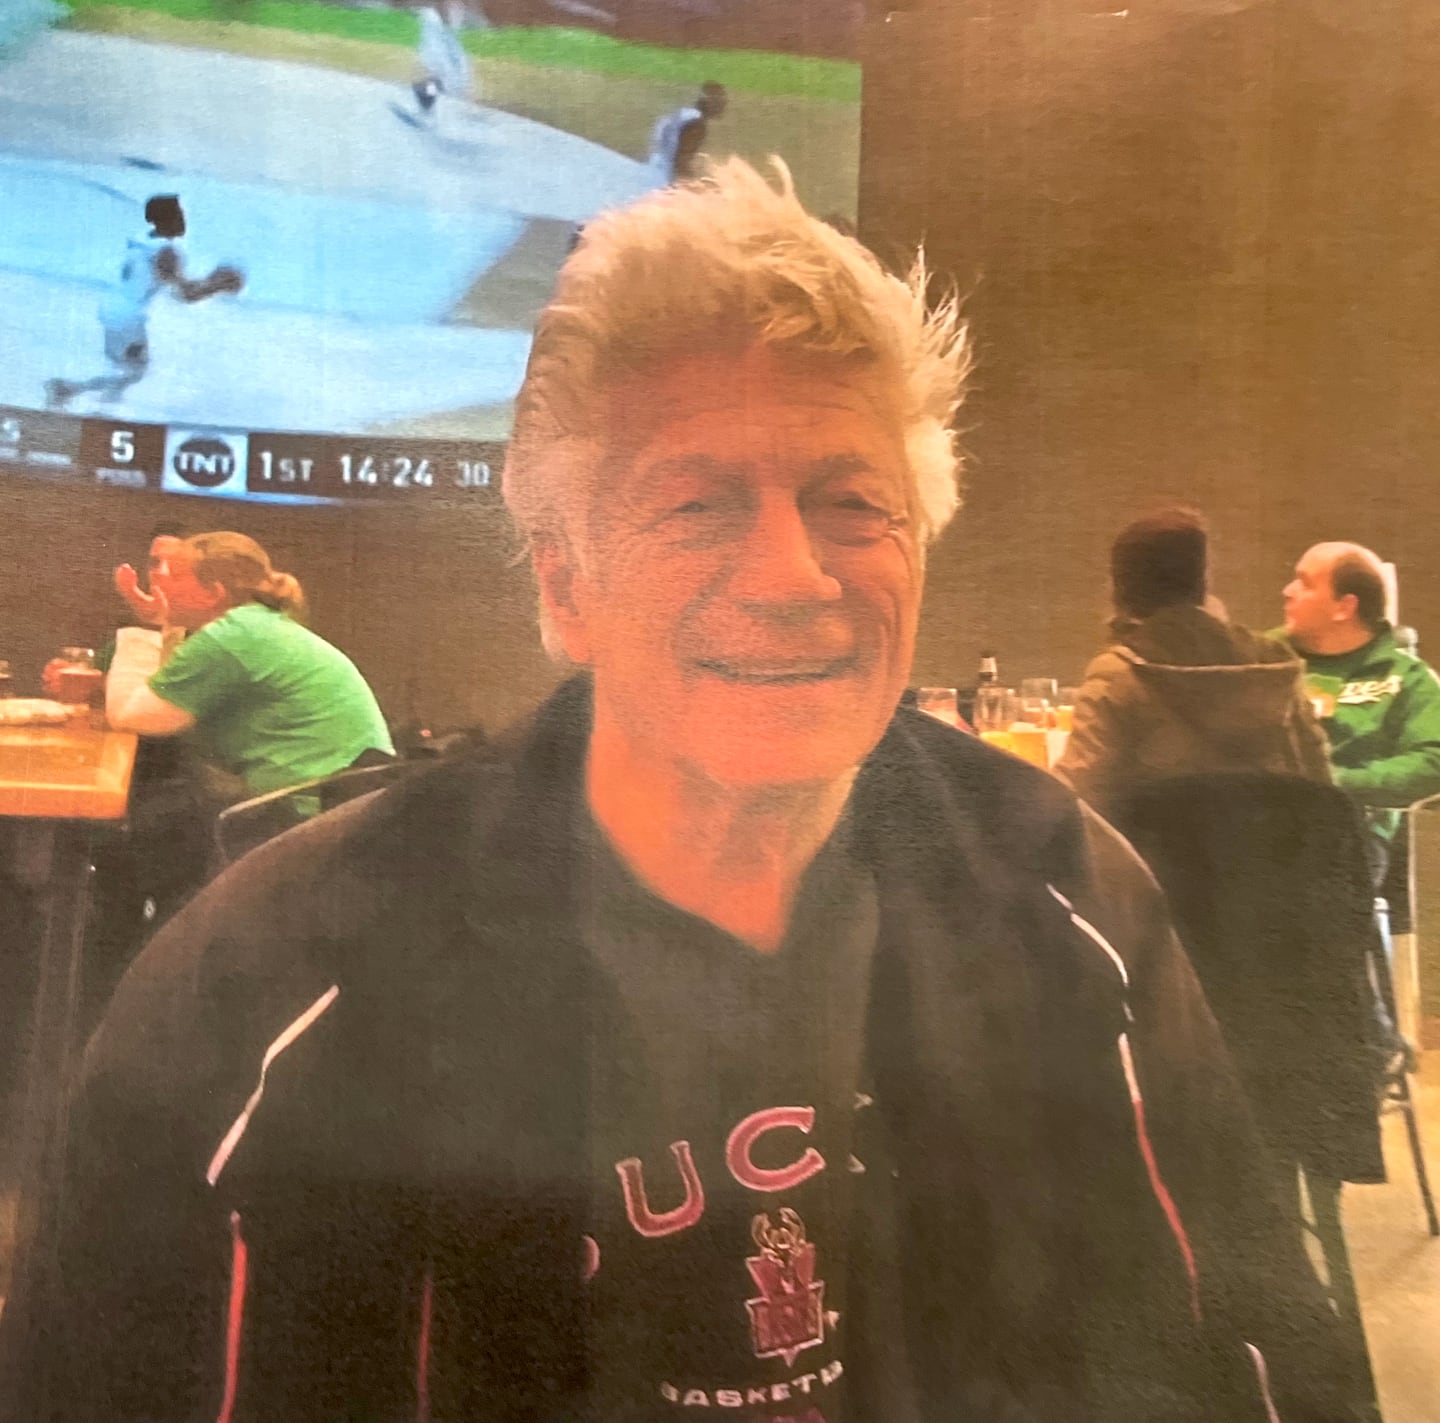 A photo of the late Emanuel “Sam” Burgarino, 76, that was shown to the jury in the trial of Robert Watson, 29, on Wednesday, May 3, 2023. Watson is charged with killing Burgarino at Harrah's casino hotel.